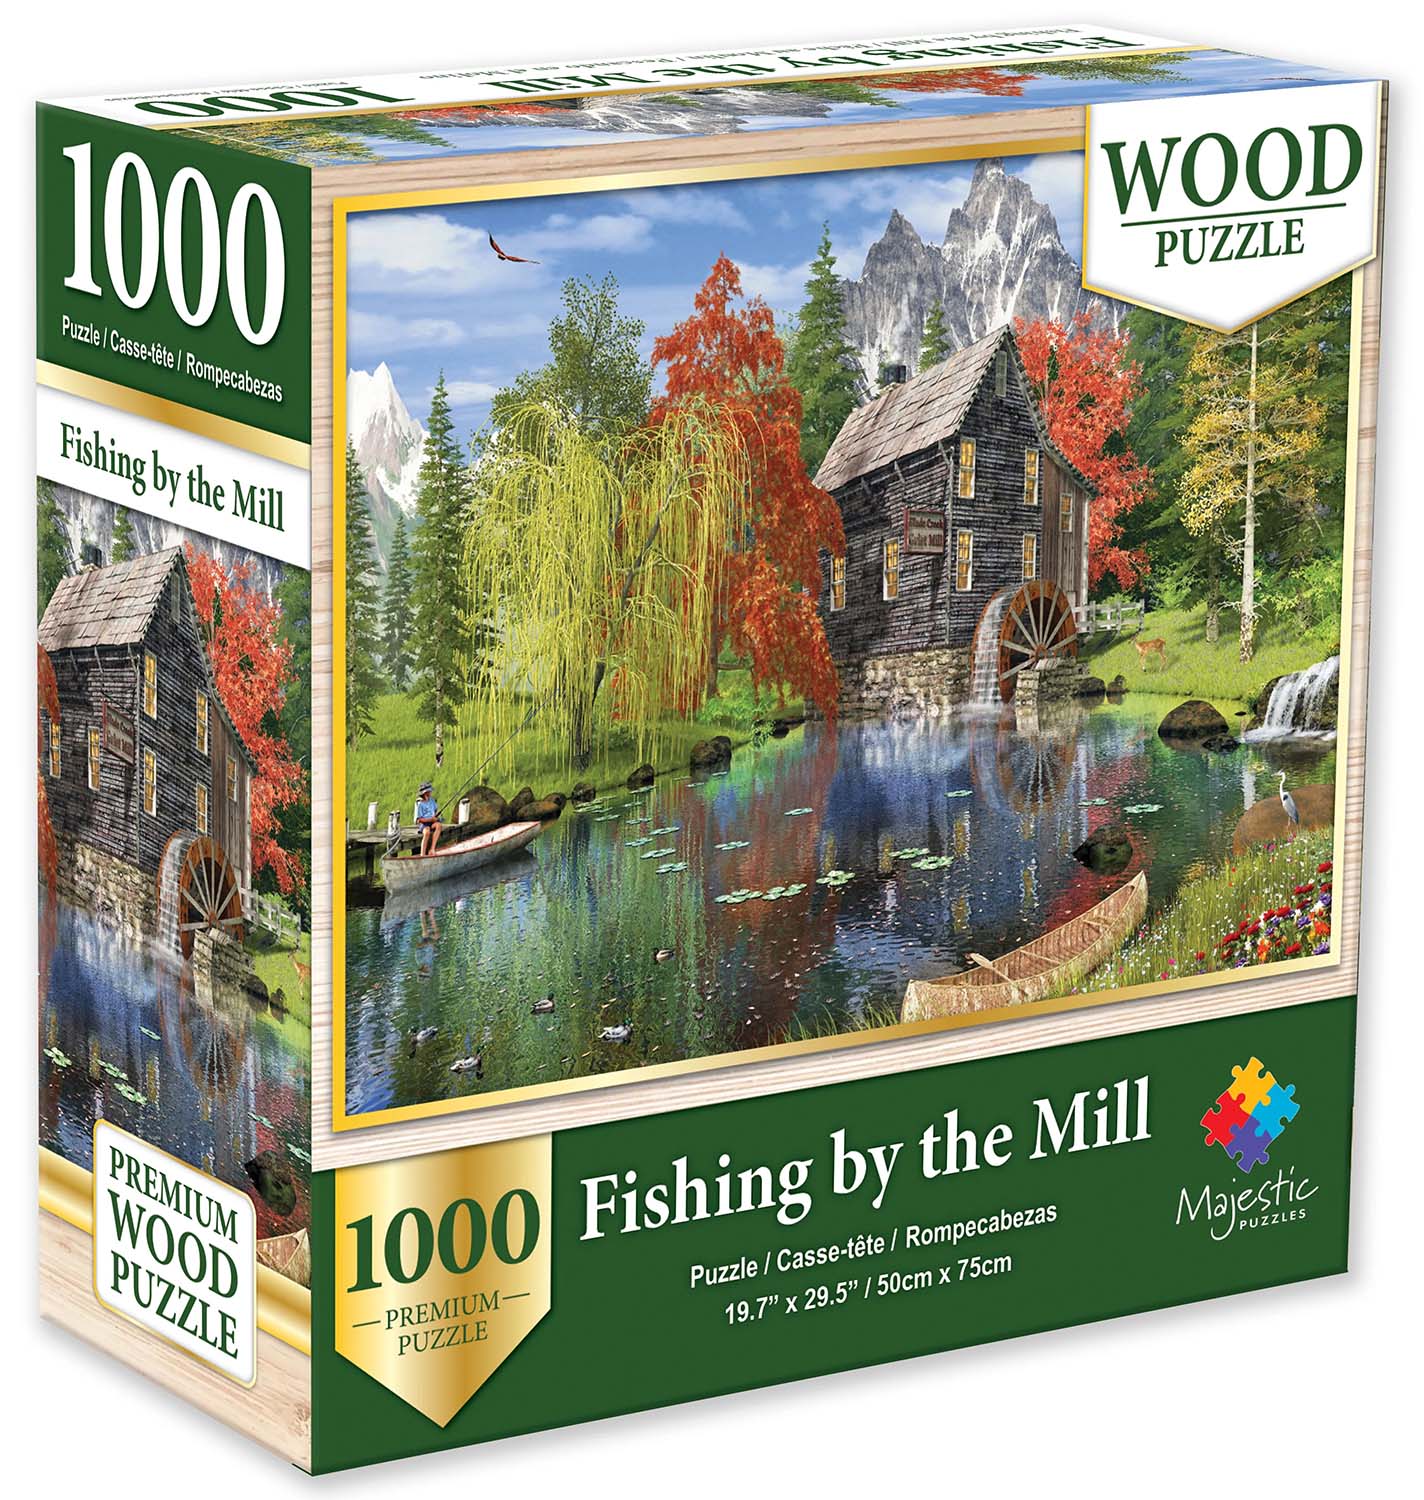 Fishing by the Mill